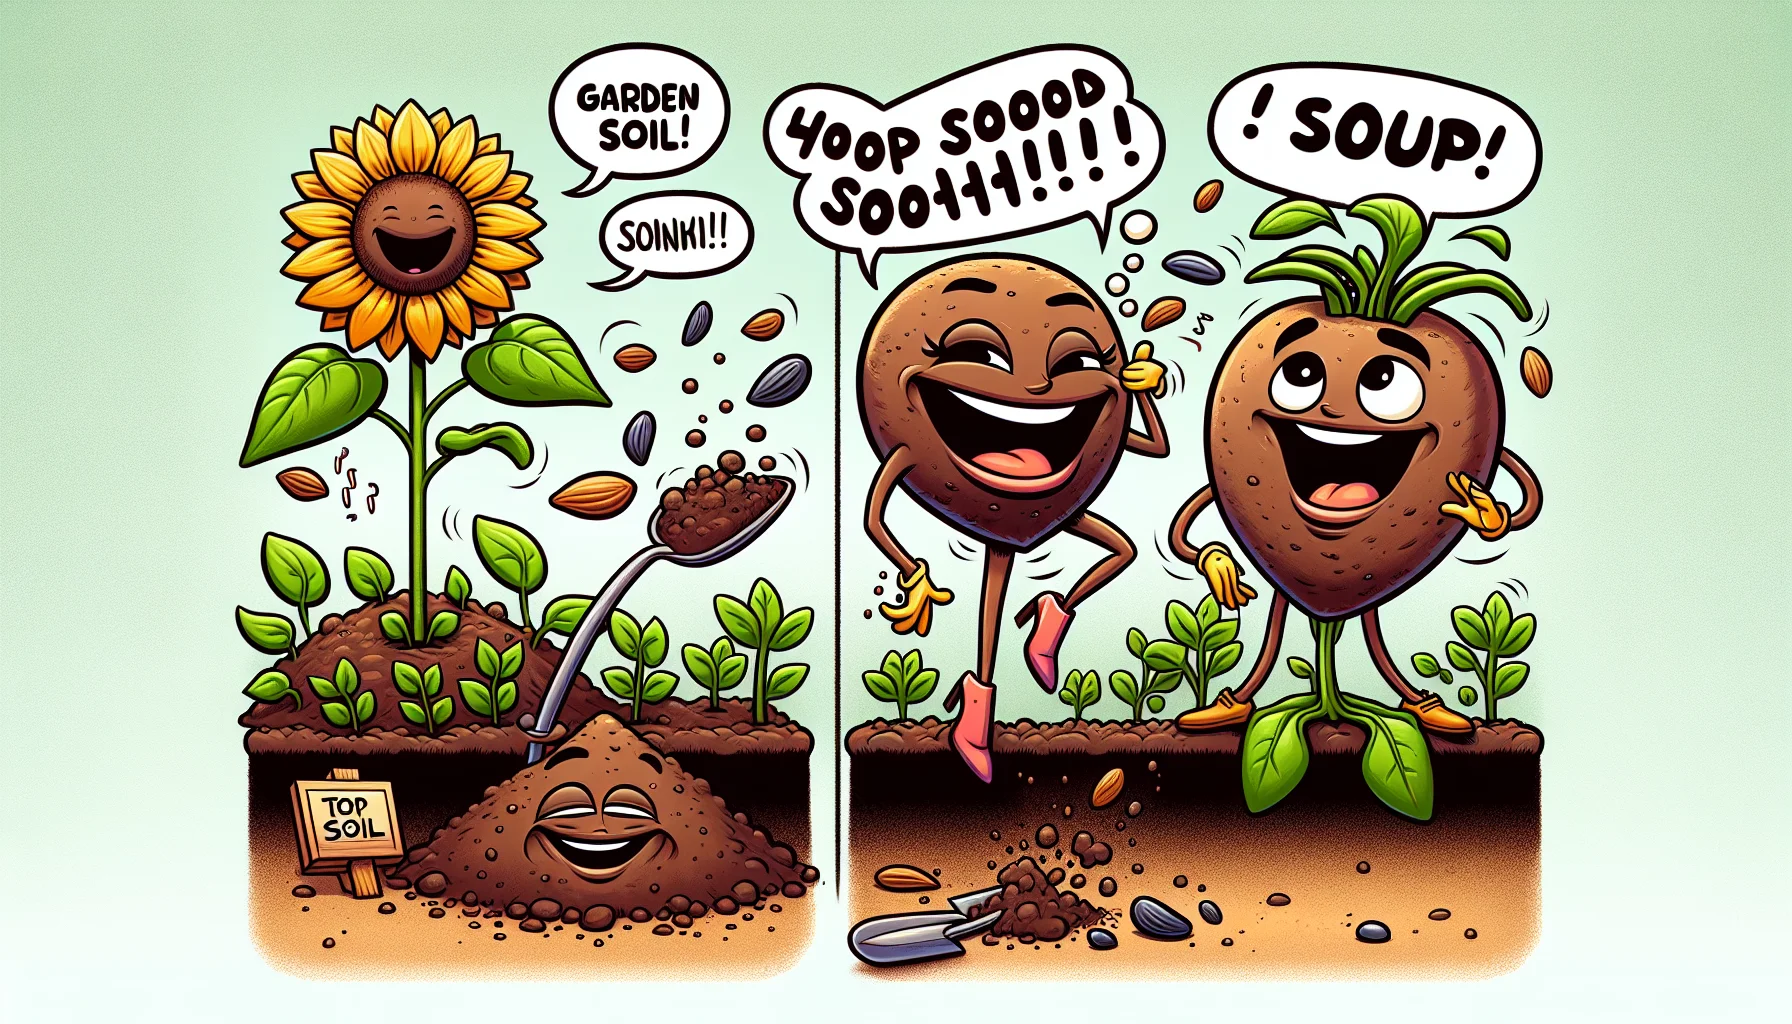 Create an image showing garden soil and top soil as animated, friendly characters in a humorous situation: the garden soil is a jovial, stout female character with rich brown color, laughing heartily, juggling plants while the top soil is a lanky, whimsical male character of a lighter brown shade, snickering as he tries to balance a seed on his tip. Both are surrounded by a garden scene that's ready to be planted. A sunflower in the corner is depicted as a comic strip style 'narrator', teasing the viewer with speech bubbles encouraging them to try gardening.